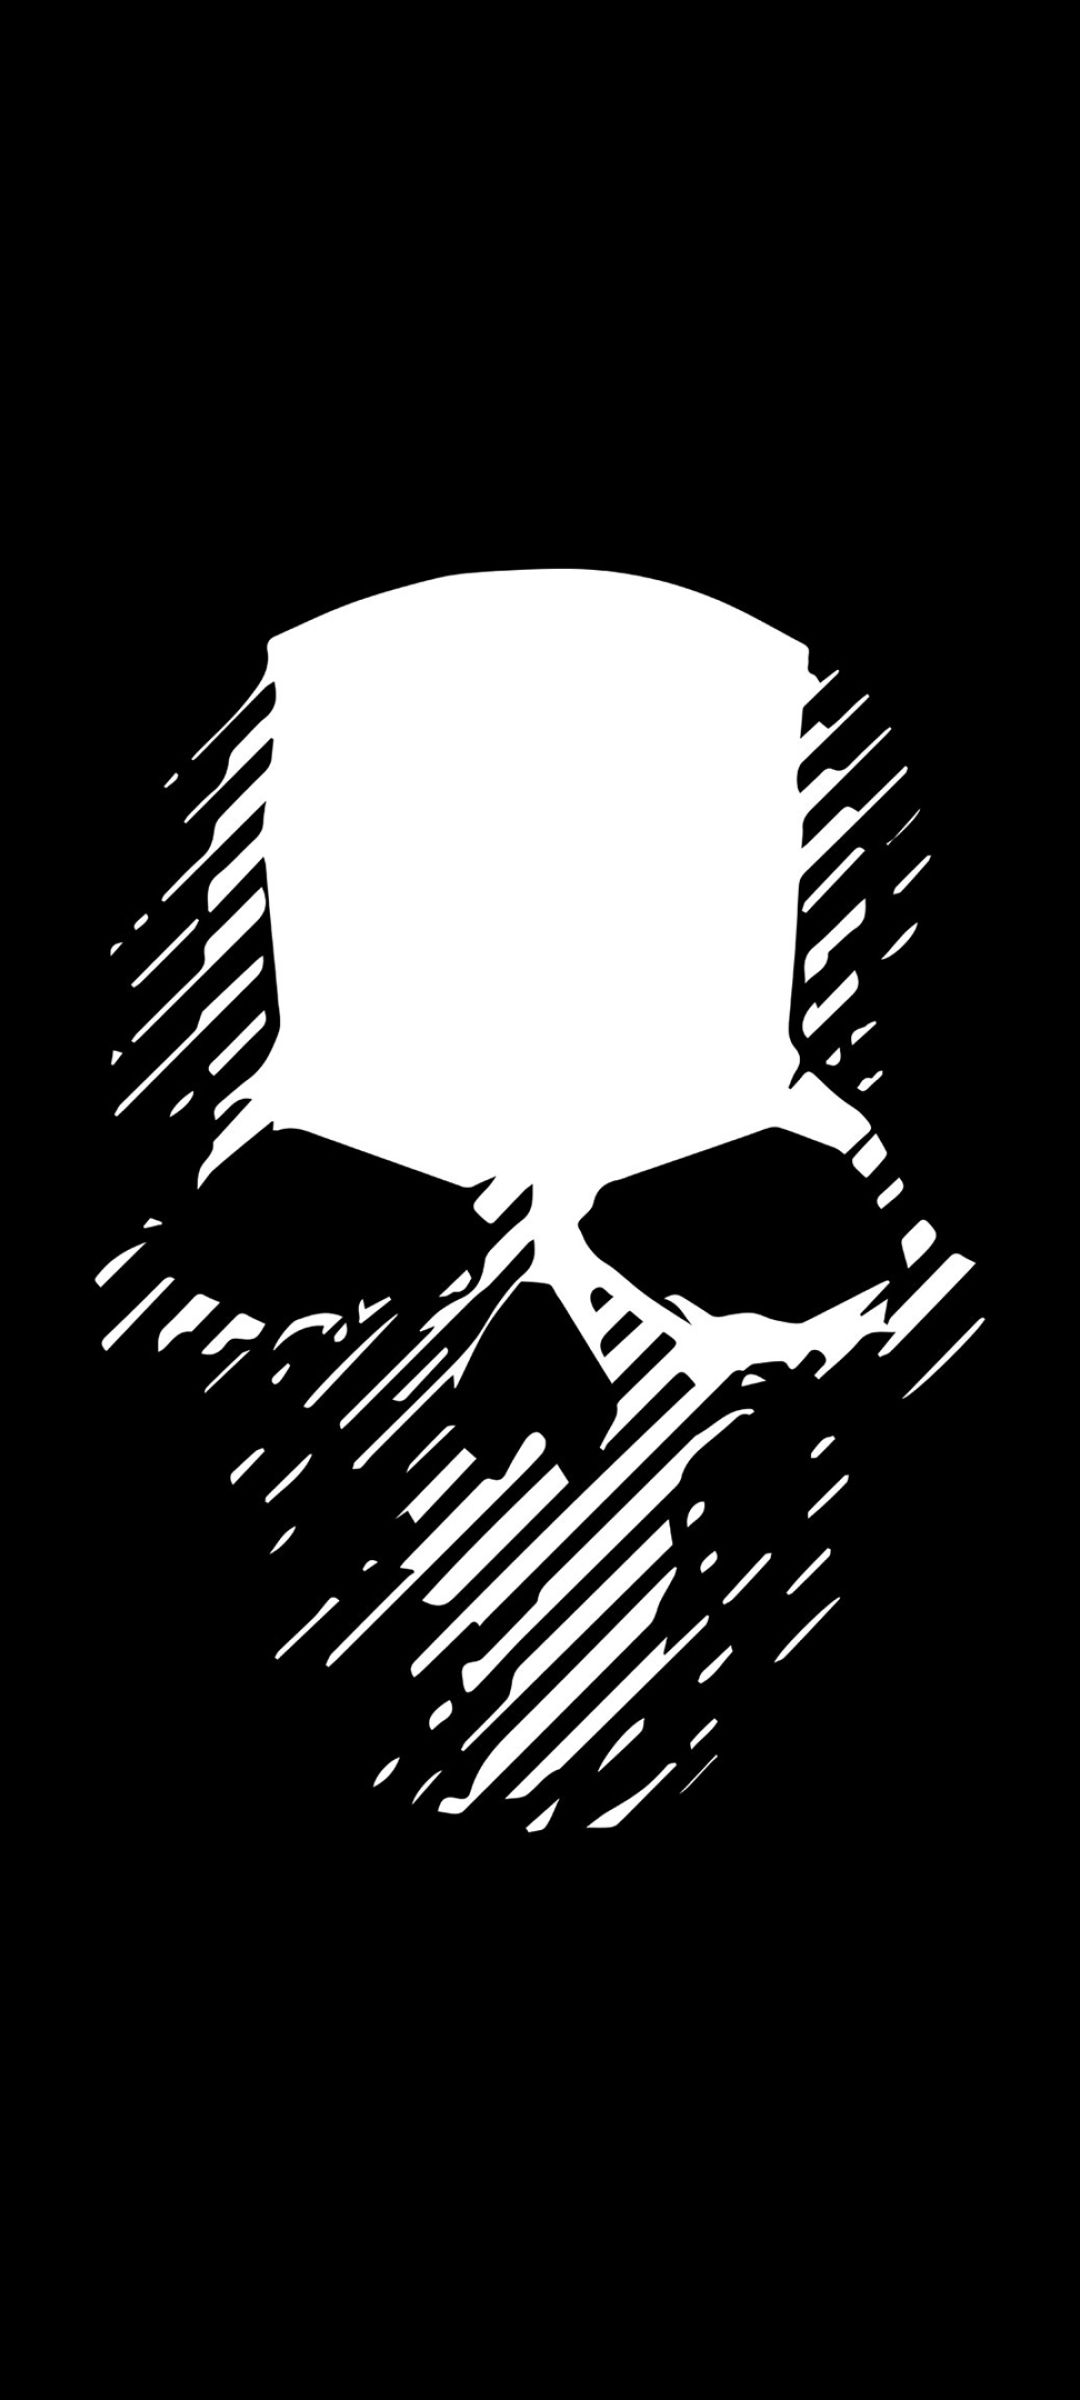 Ghost Recon Skull 1080x2400 Resolution Wallpaper, HD Games 4K Wallpaper, Image, Photo and Background